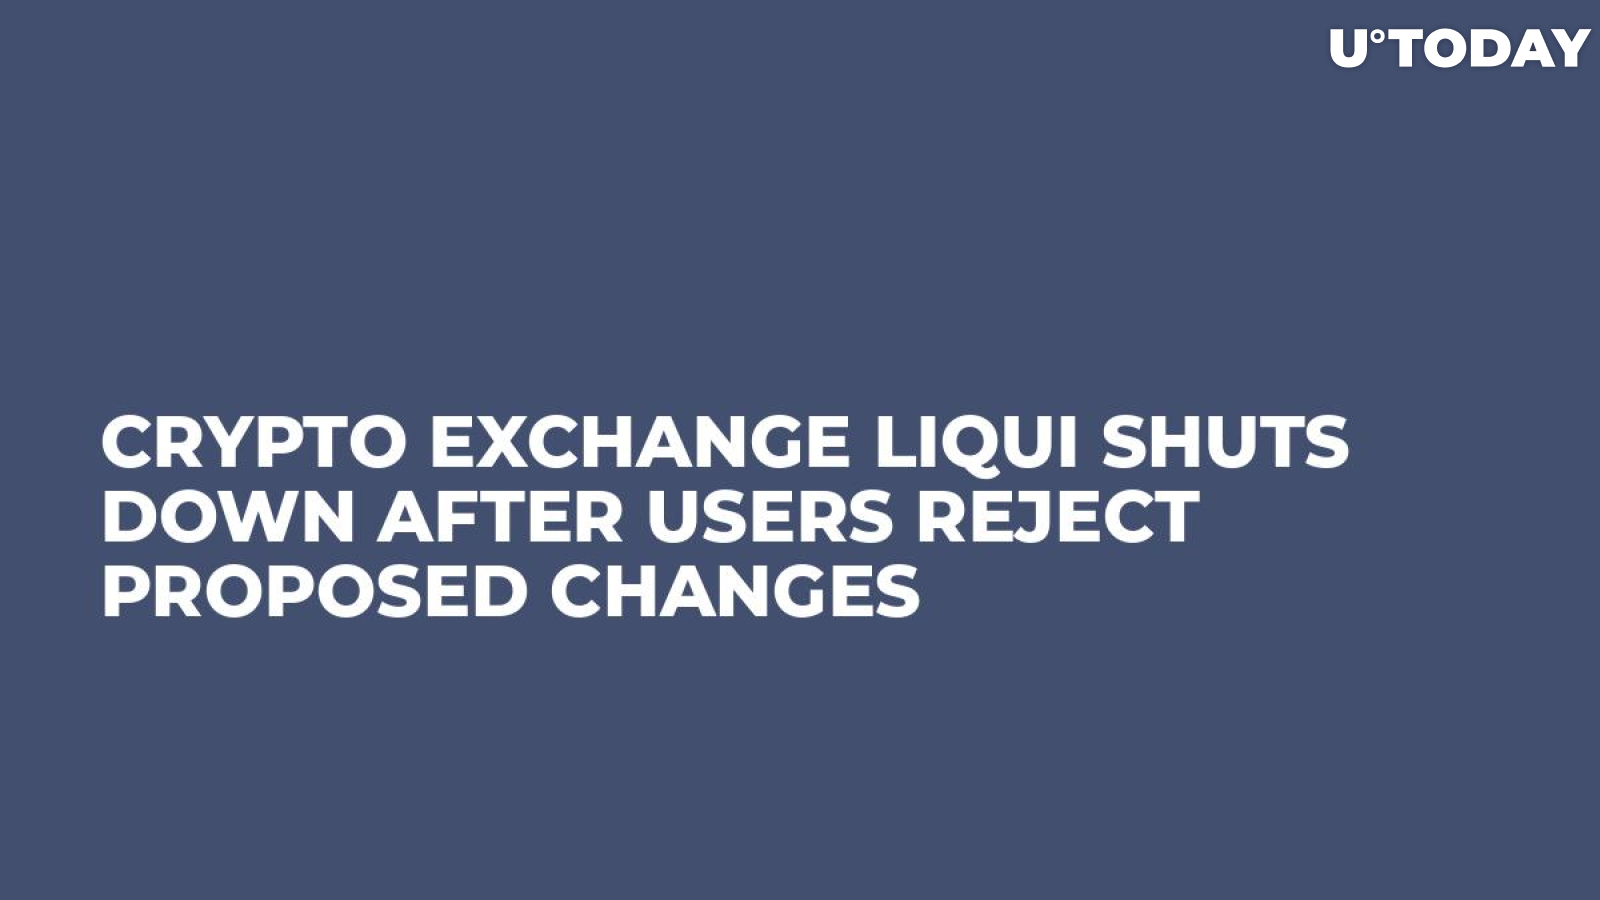 Crypto Exchange Liqui Shuts Down After Users Reject Proposed Changes